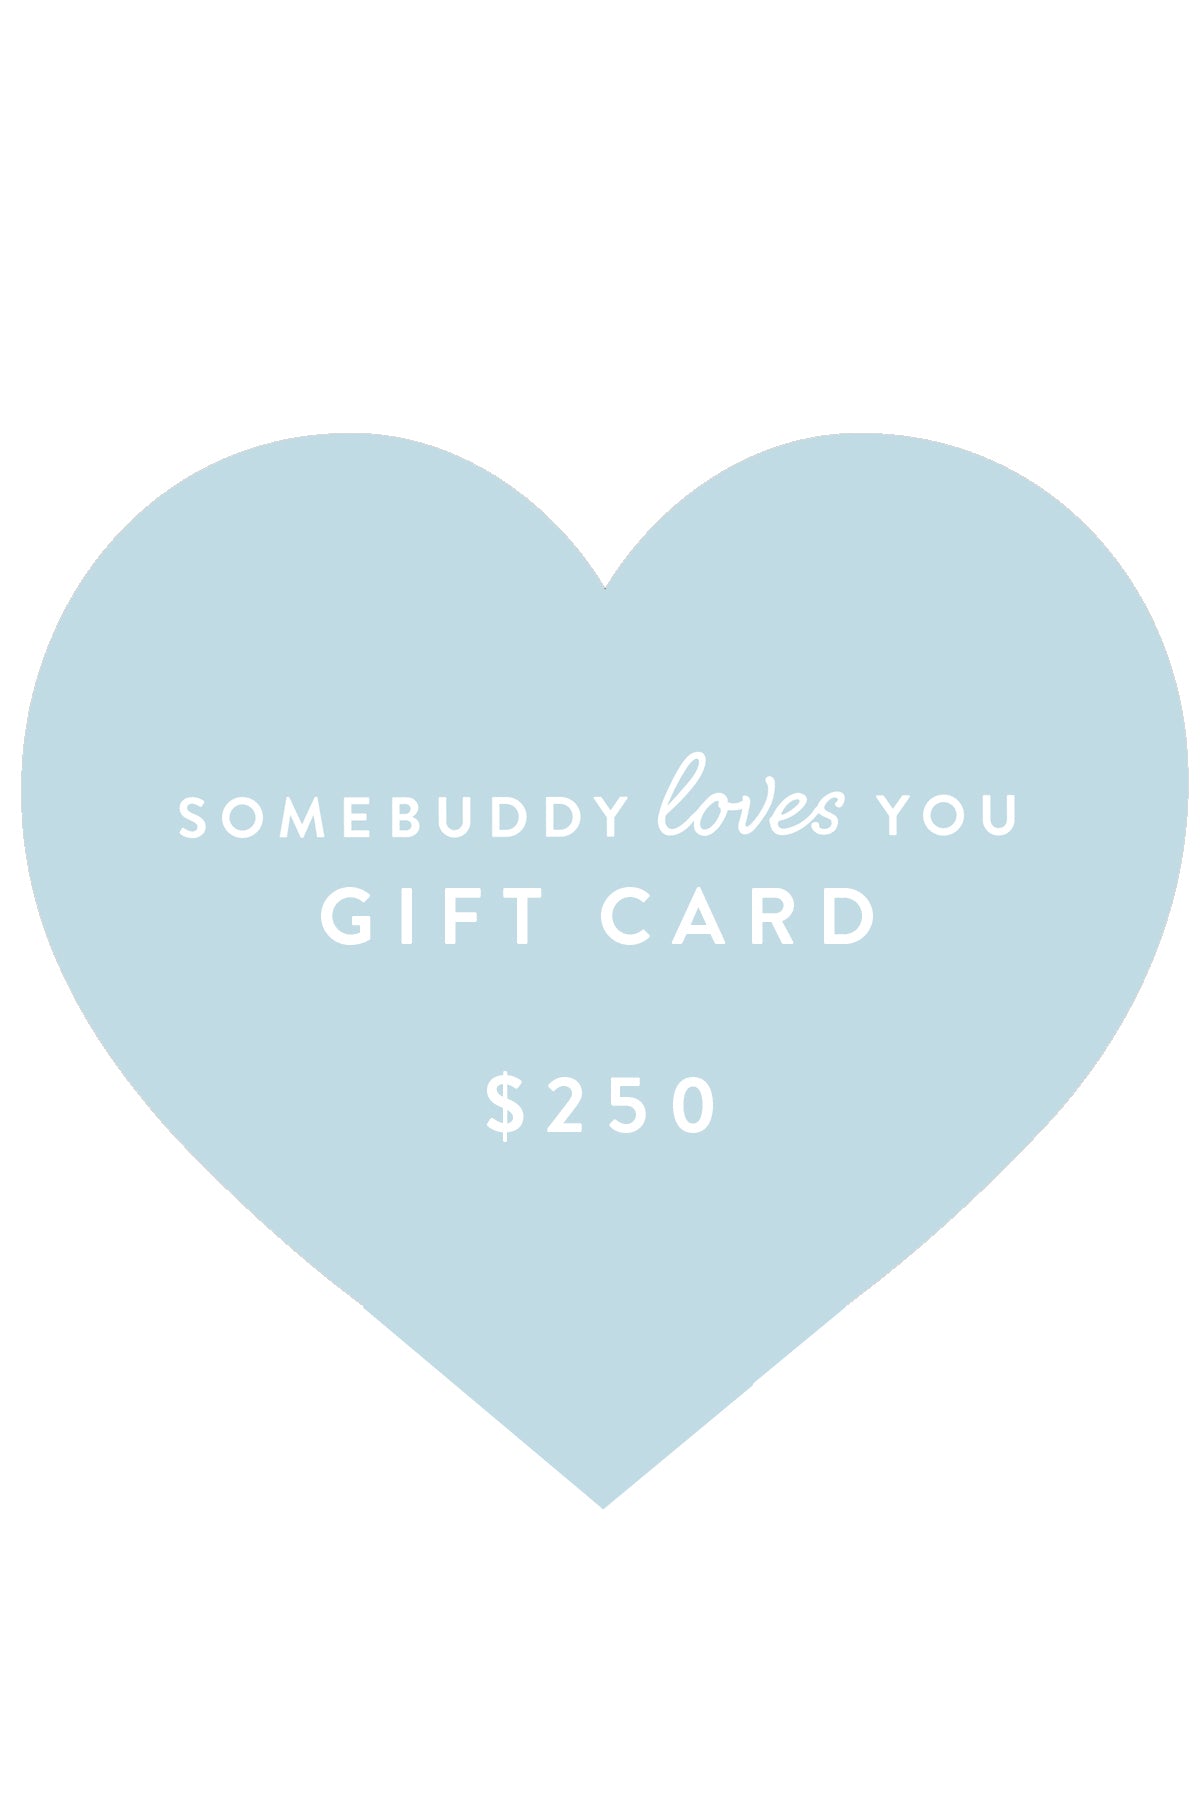 Somebuddy Loves You Gift Card $250